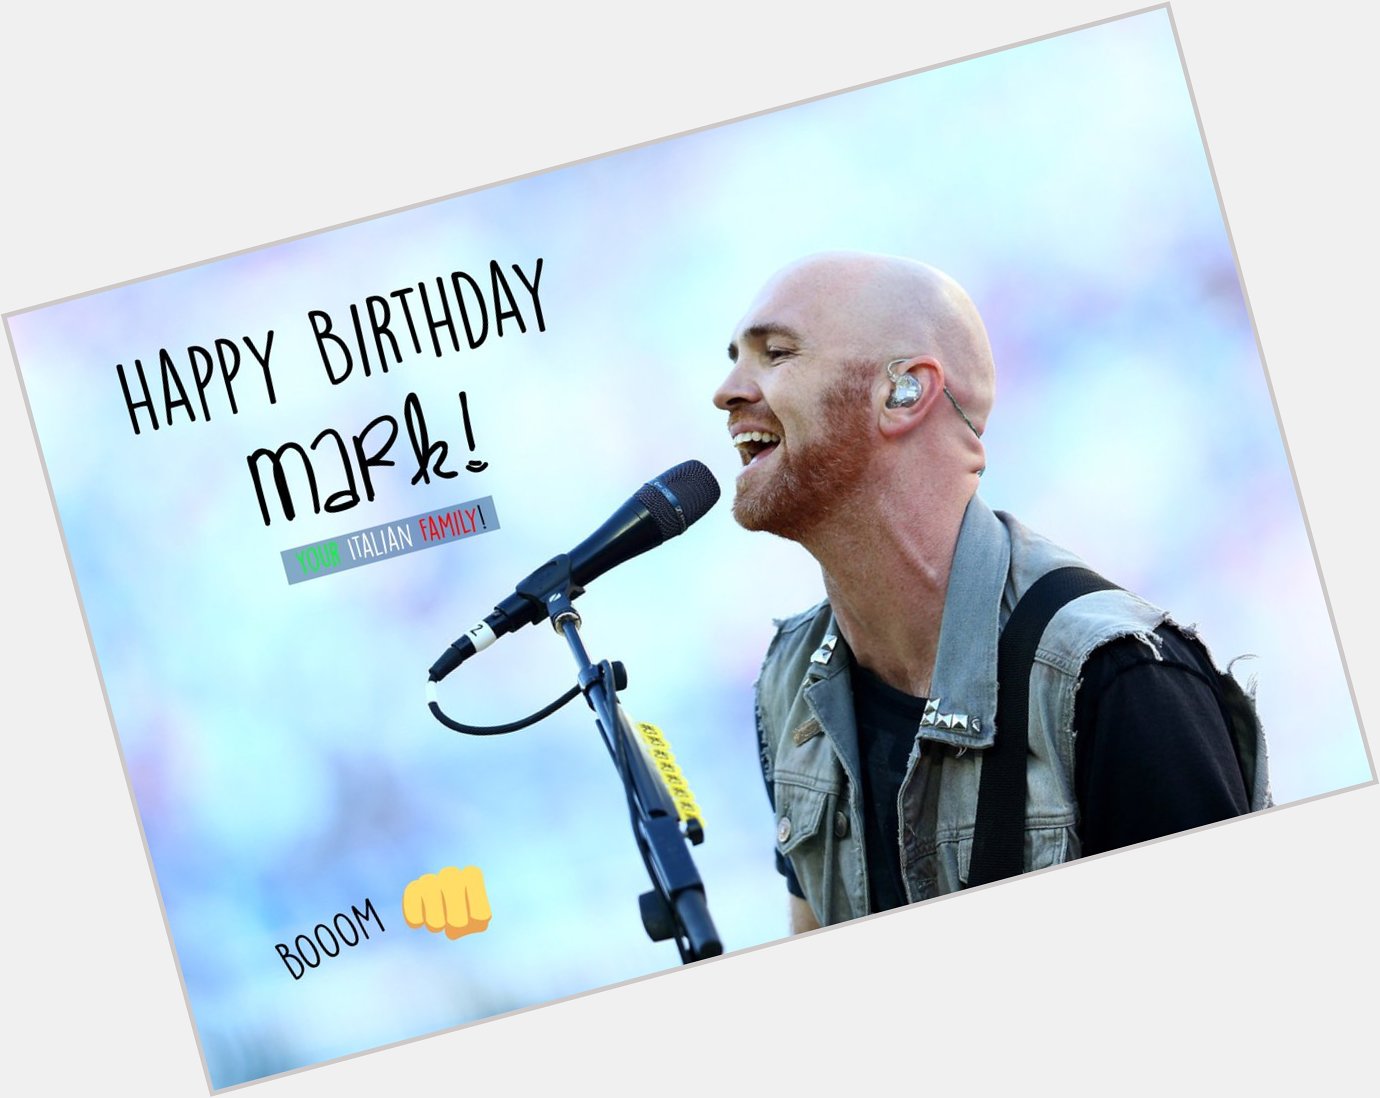 Happy Birthday to the one and only, Mark Sheehan!  